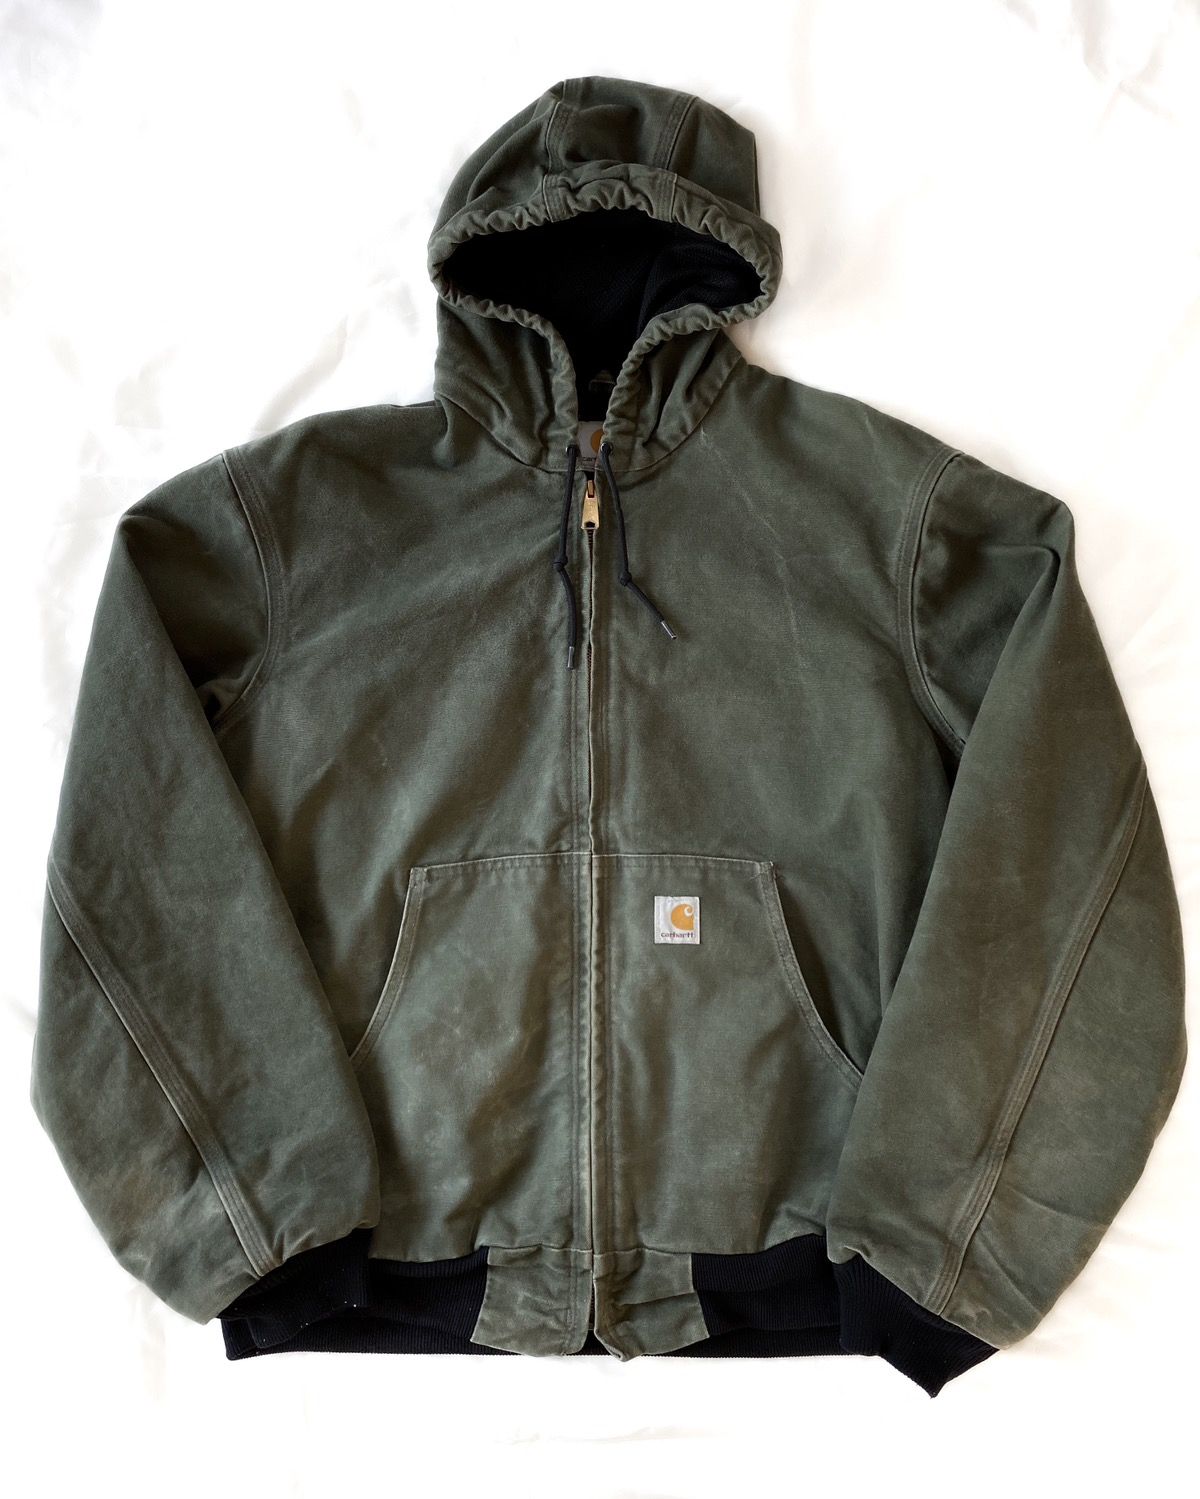 Vintage VINTAGE CARHARTT HOODED ACTIVE JACKET : FOREST GREEN Size US XL / EU 56 / 4 - 1 Preview